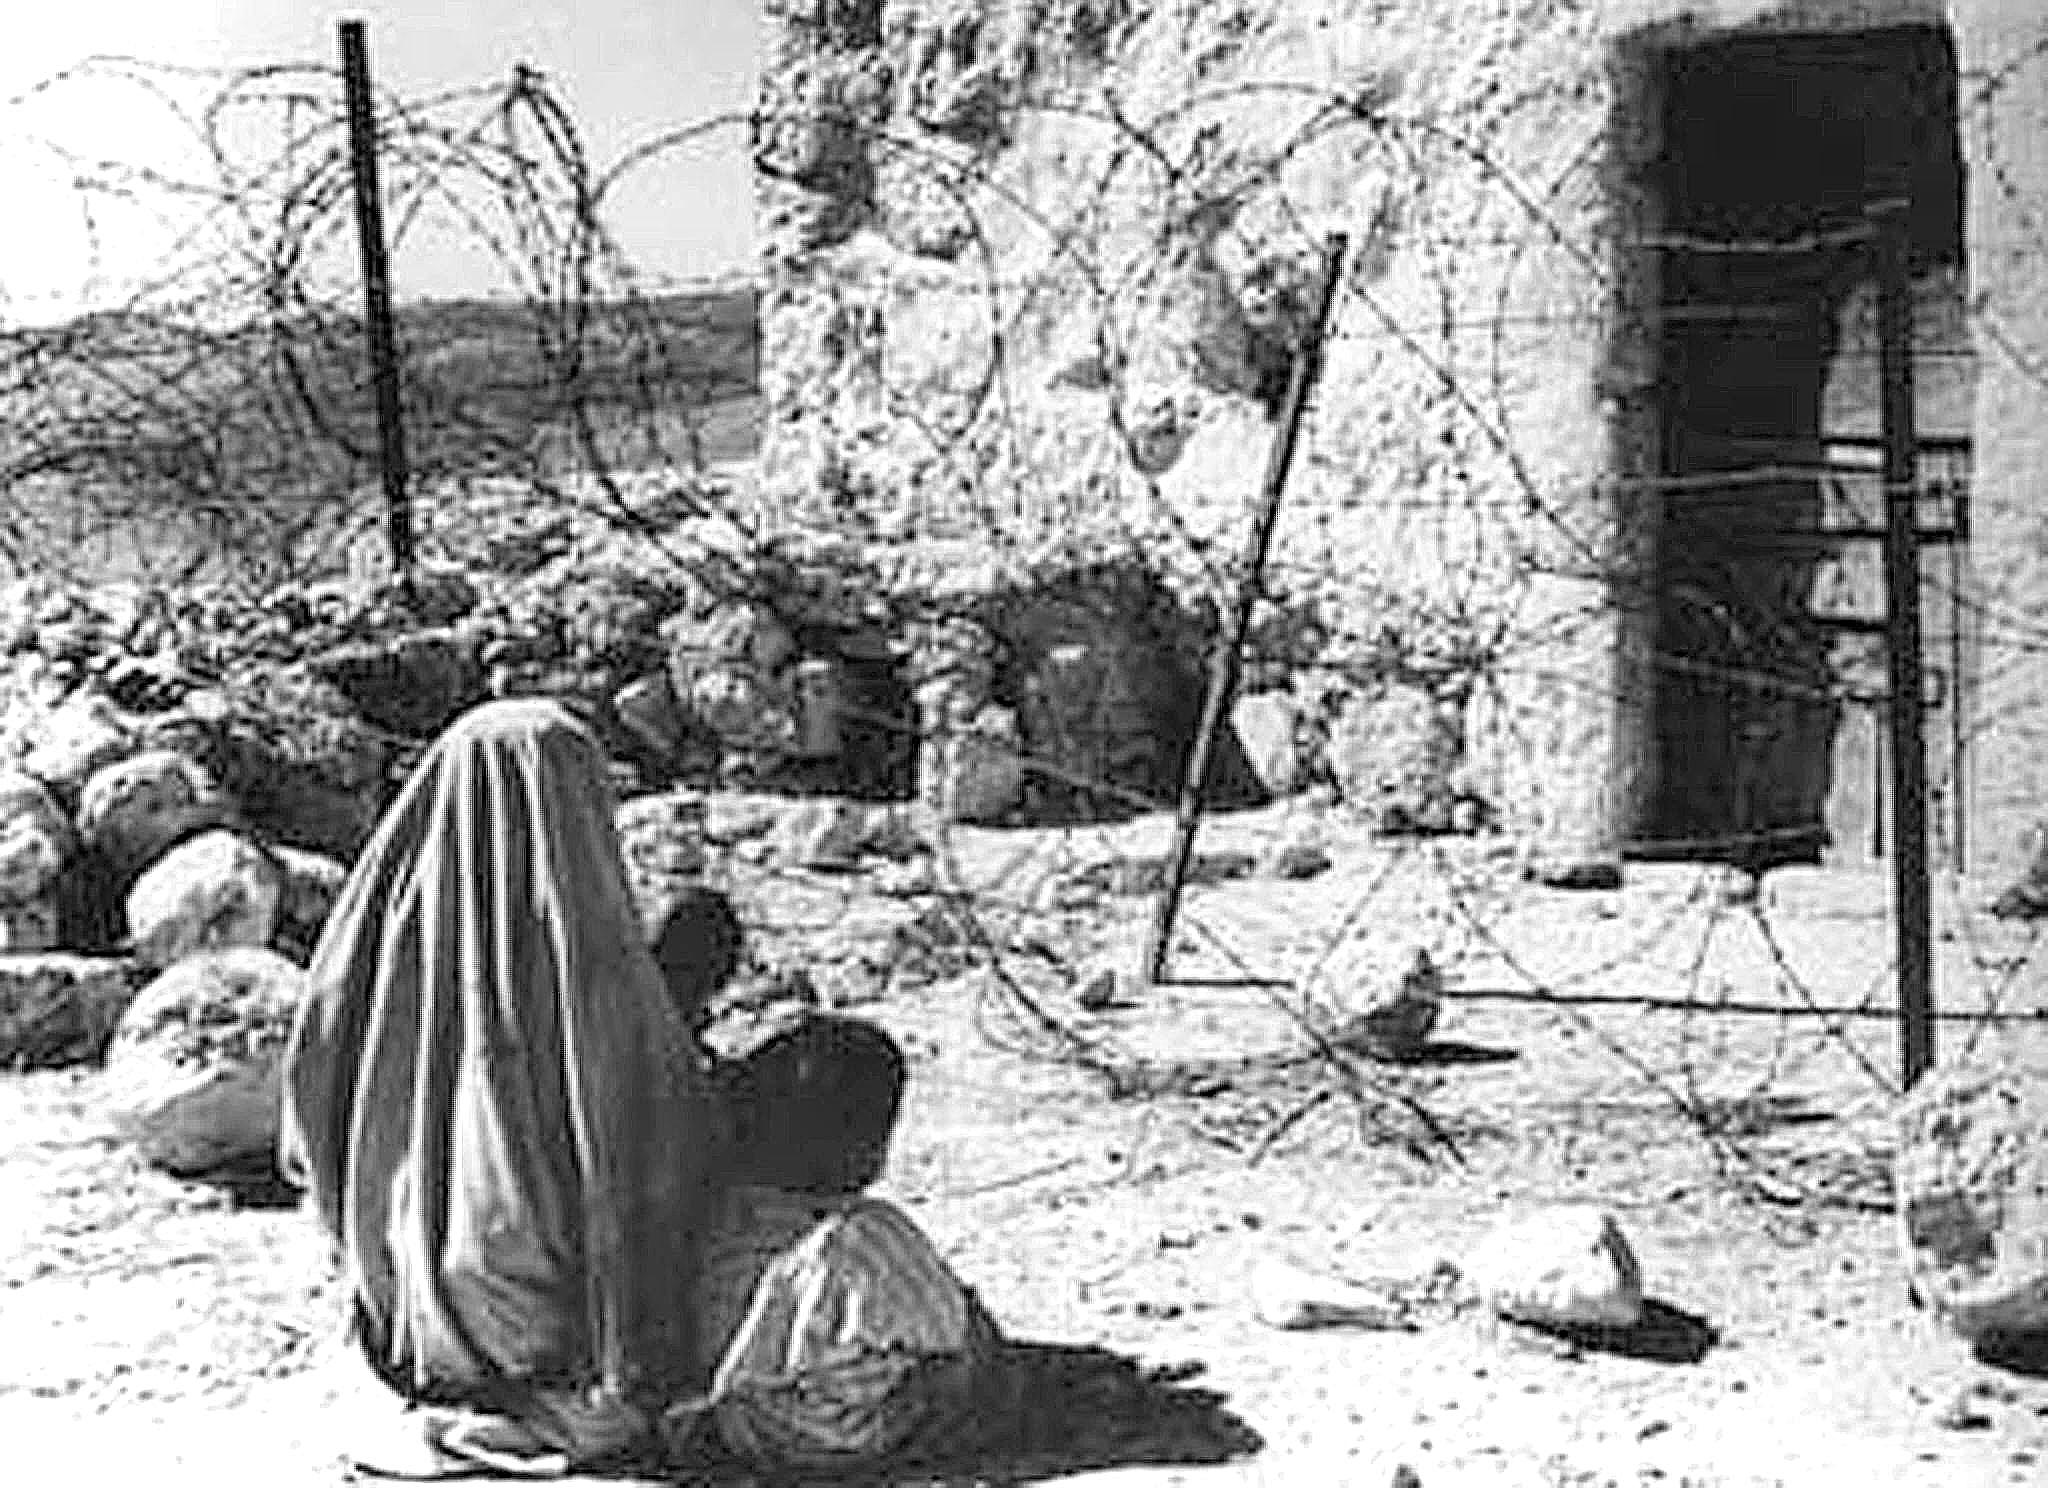  a Palestinian woman refugee and her child separated from their home by the "green line" after the 1948 war